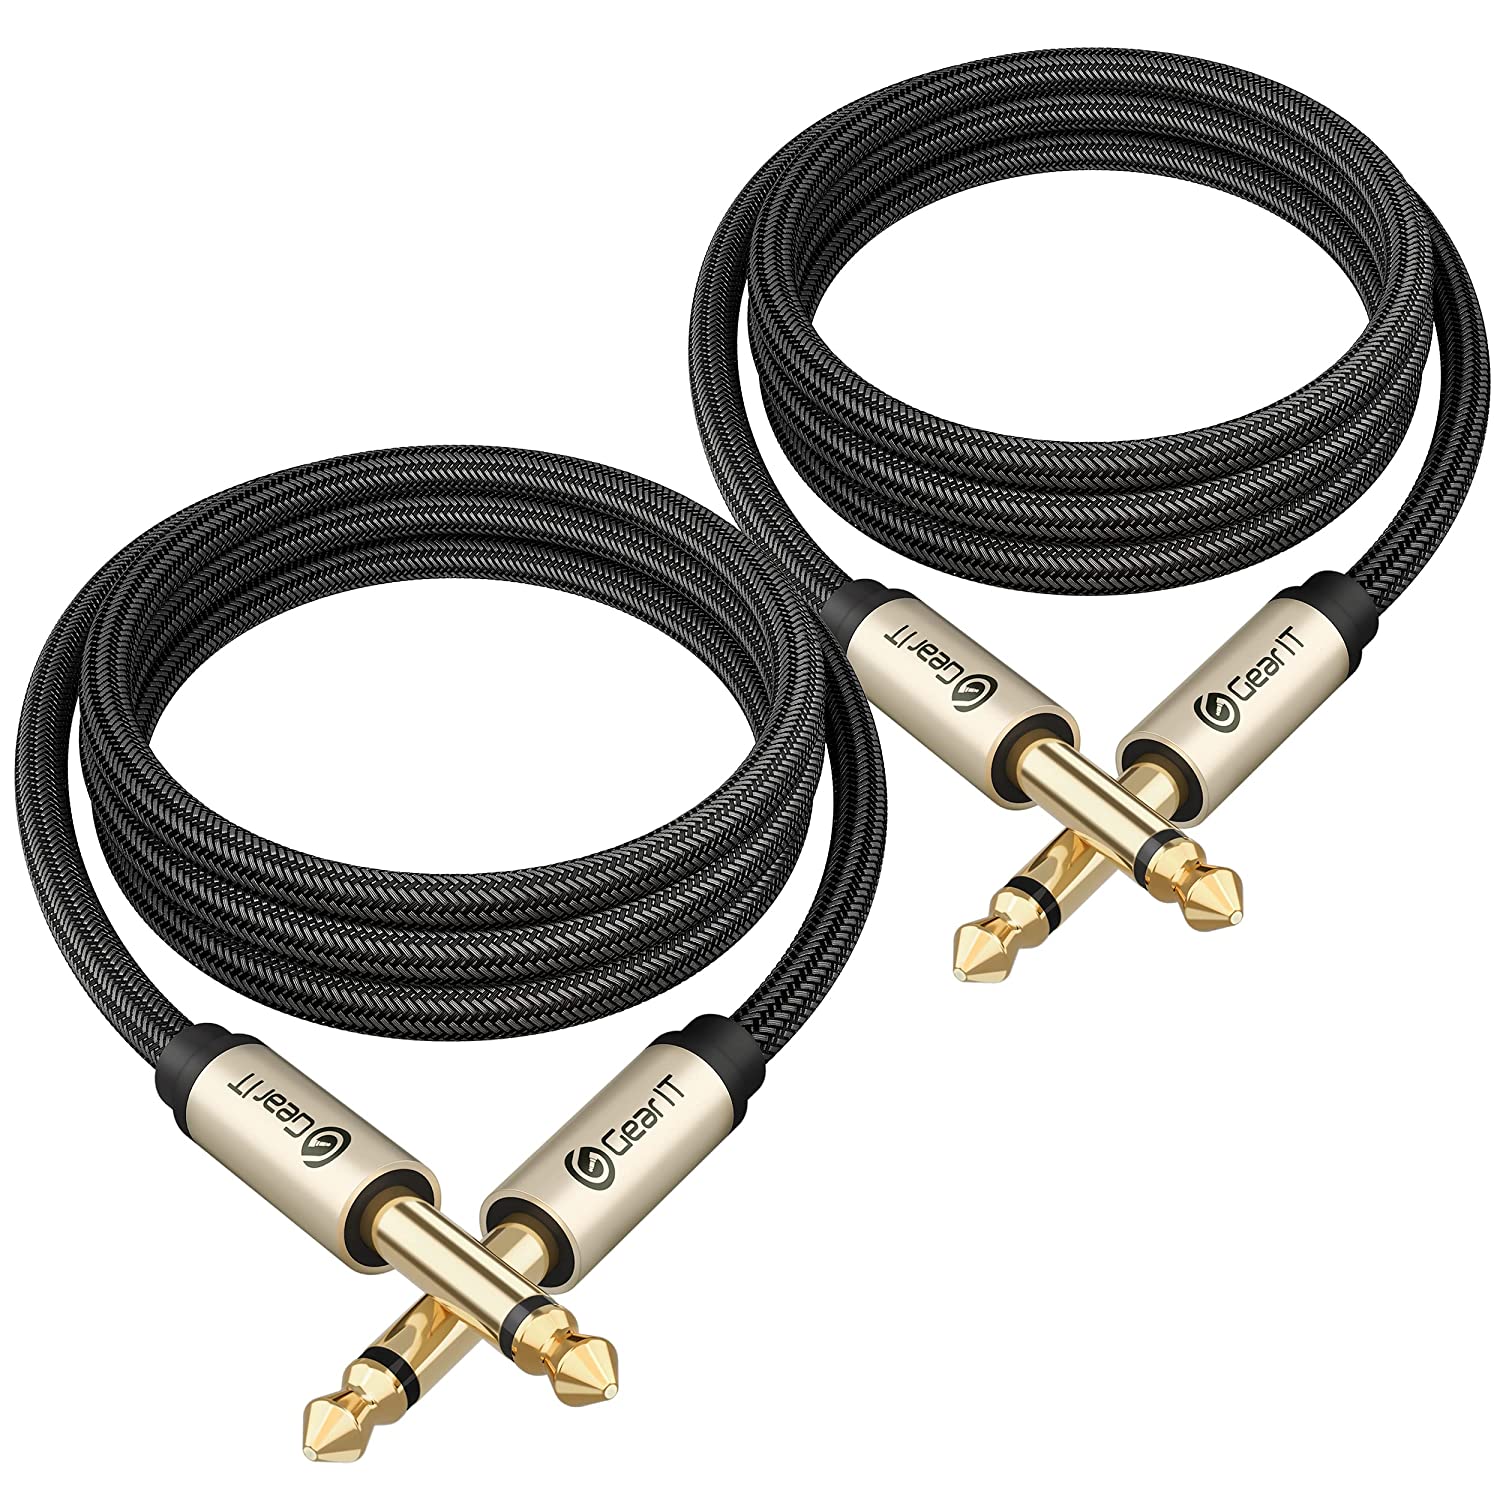 GearIT Guitar Instrument Cable (3ft 2-Pack) 1/4 Inch [...]